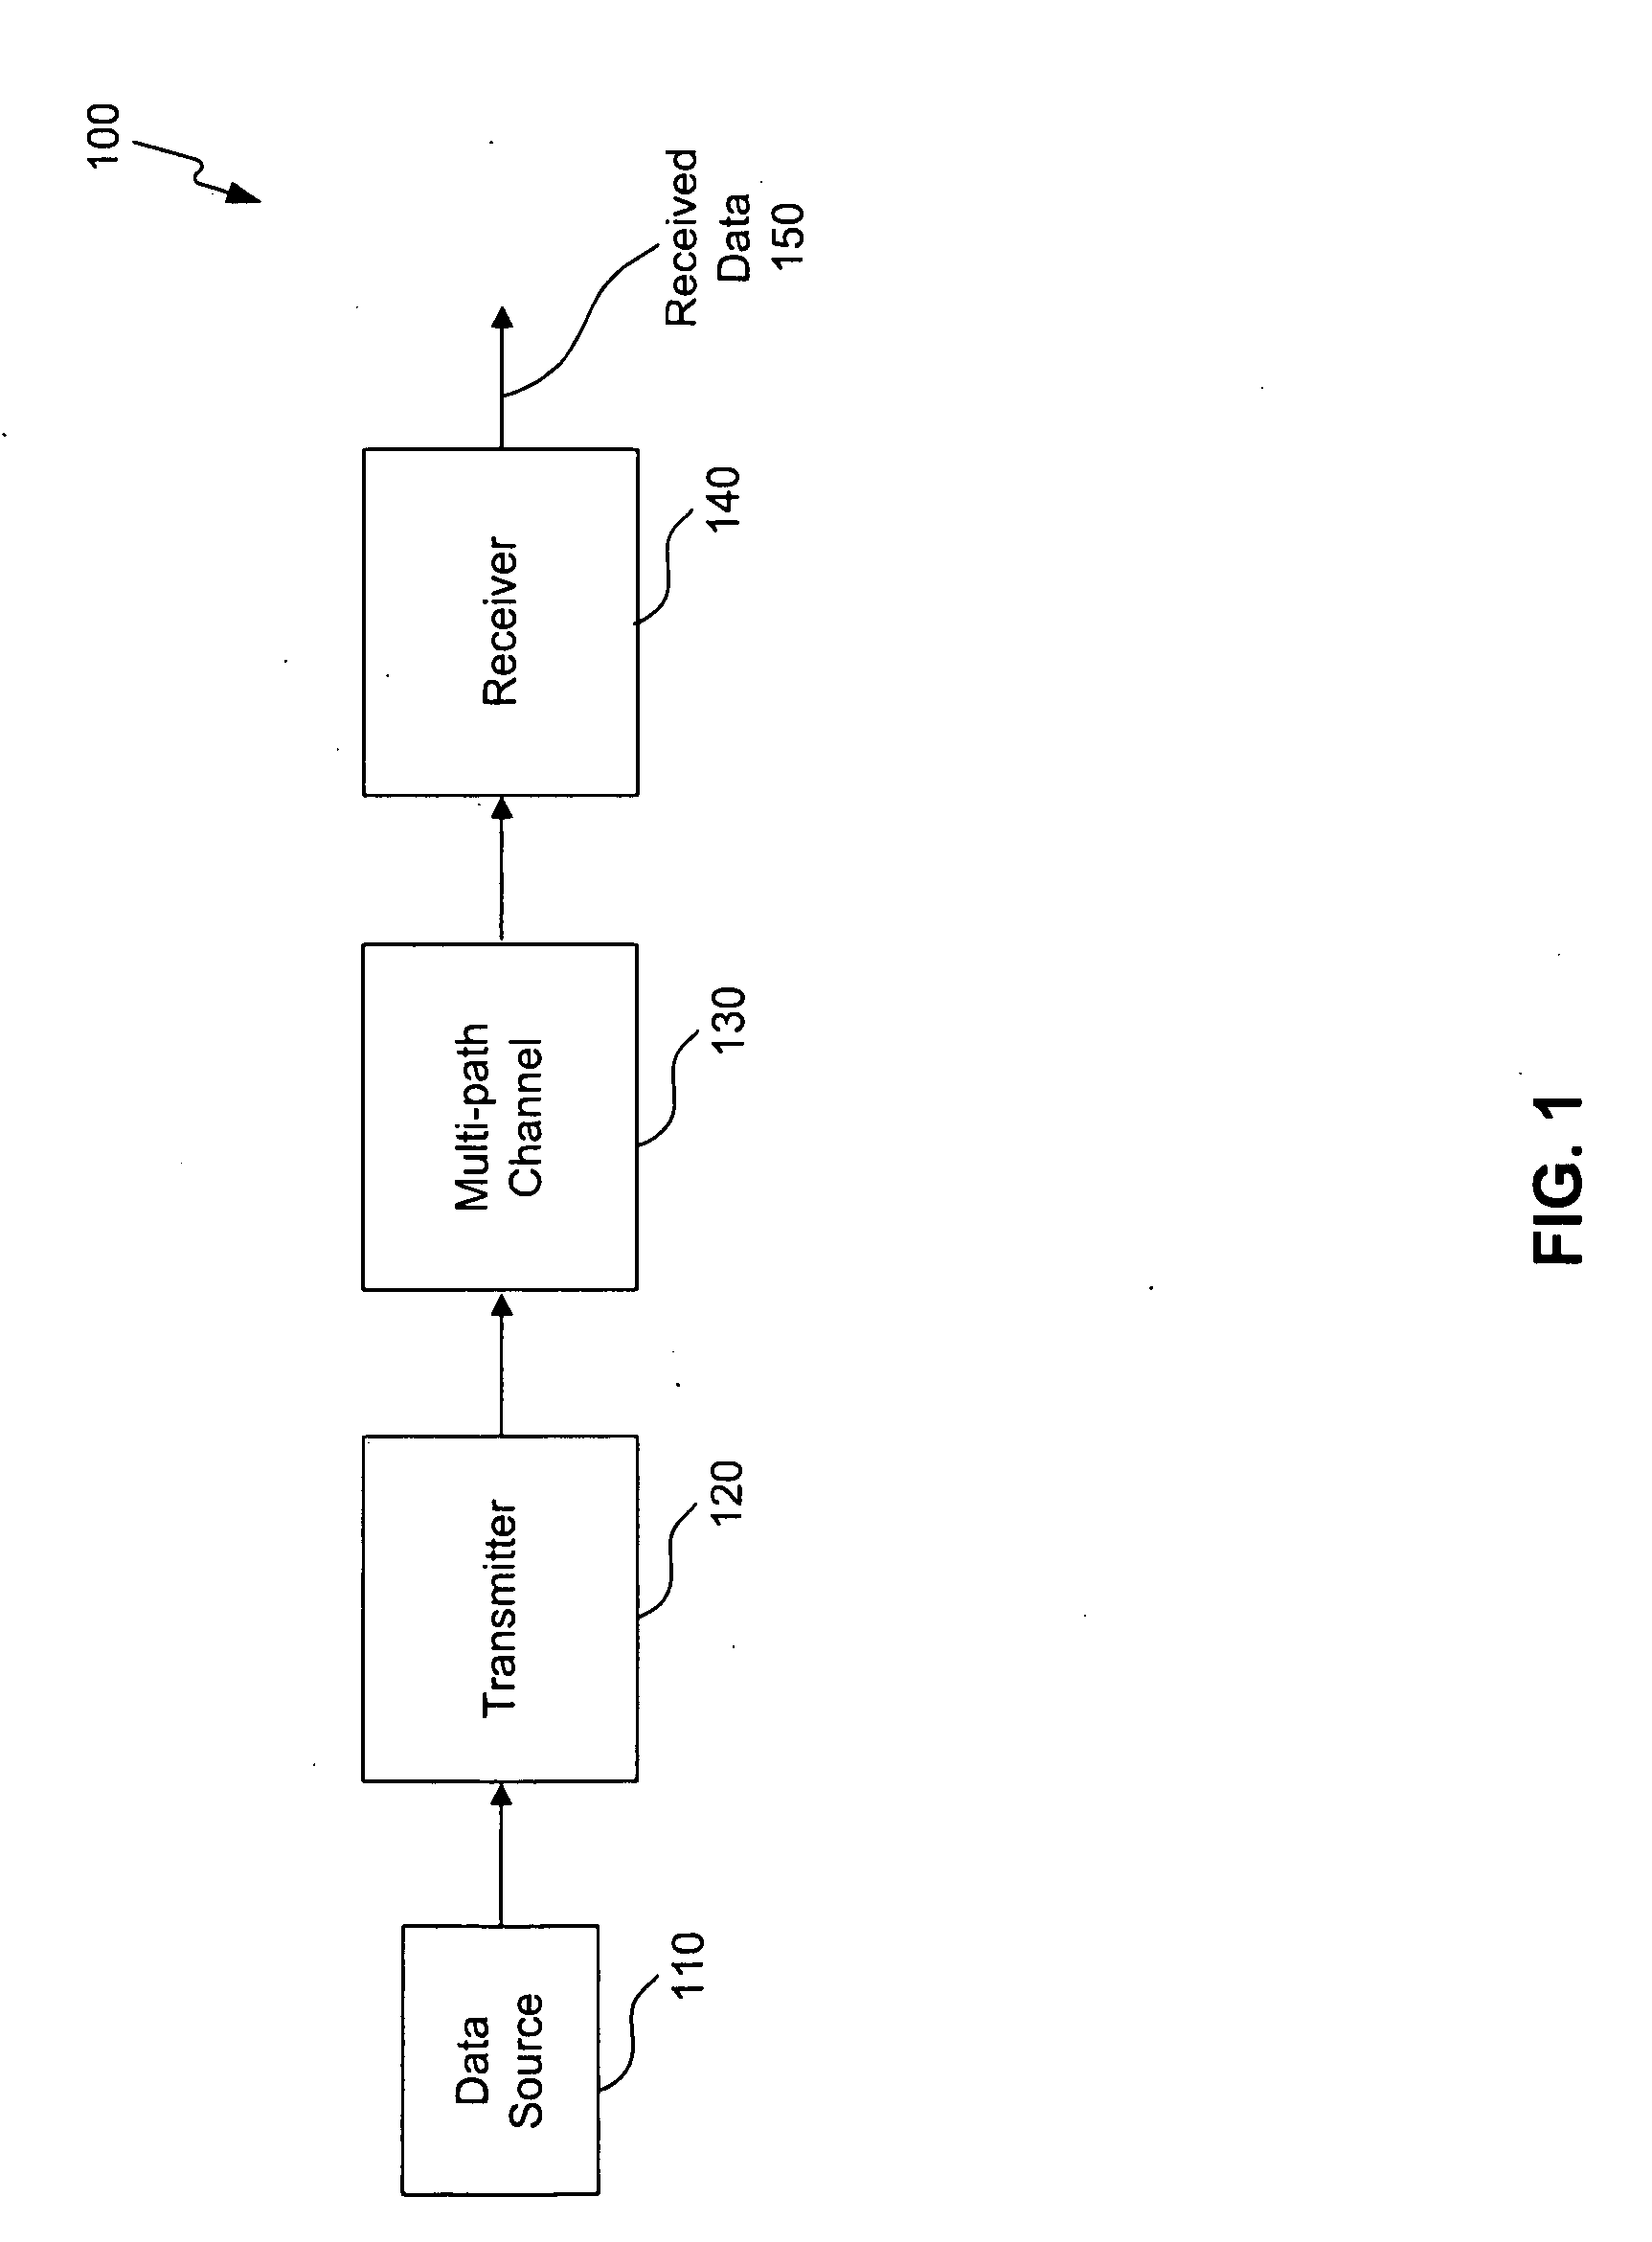 Data Transmission Via Multi-Path Channels Using Orthogonal Multi-Frequency Signals With Differential Phase Shift Keying Modulation